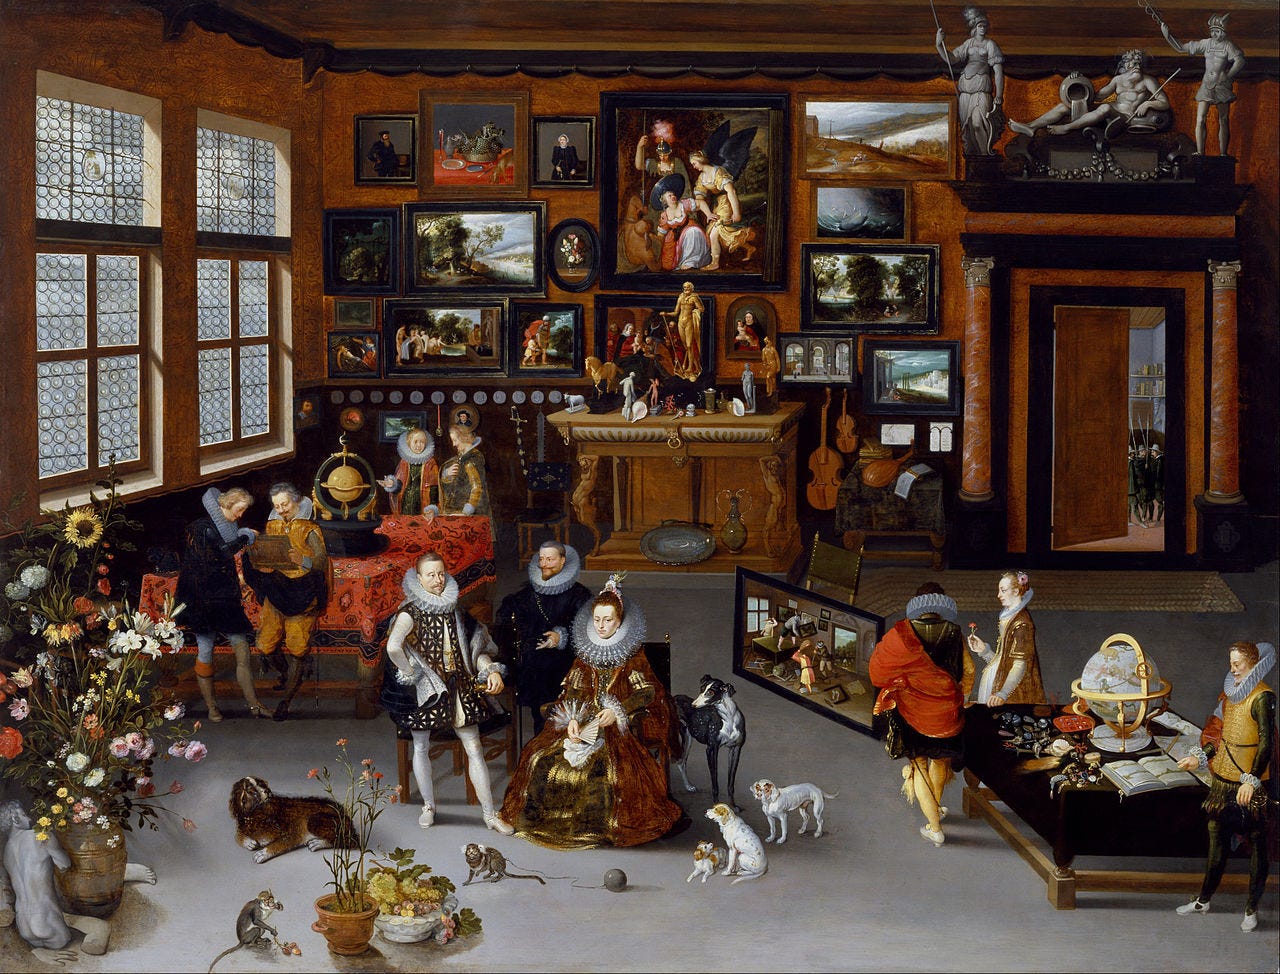 Hieronymus Francken Ii - The Archdukes Albert and Isabella Visiting a Collector's Cabinet - Google Art Project.jpg